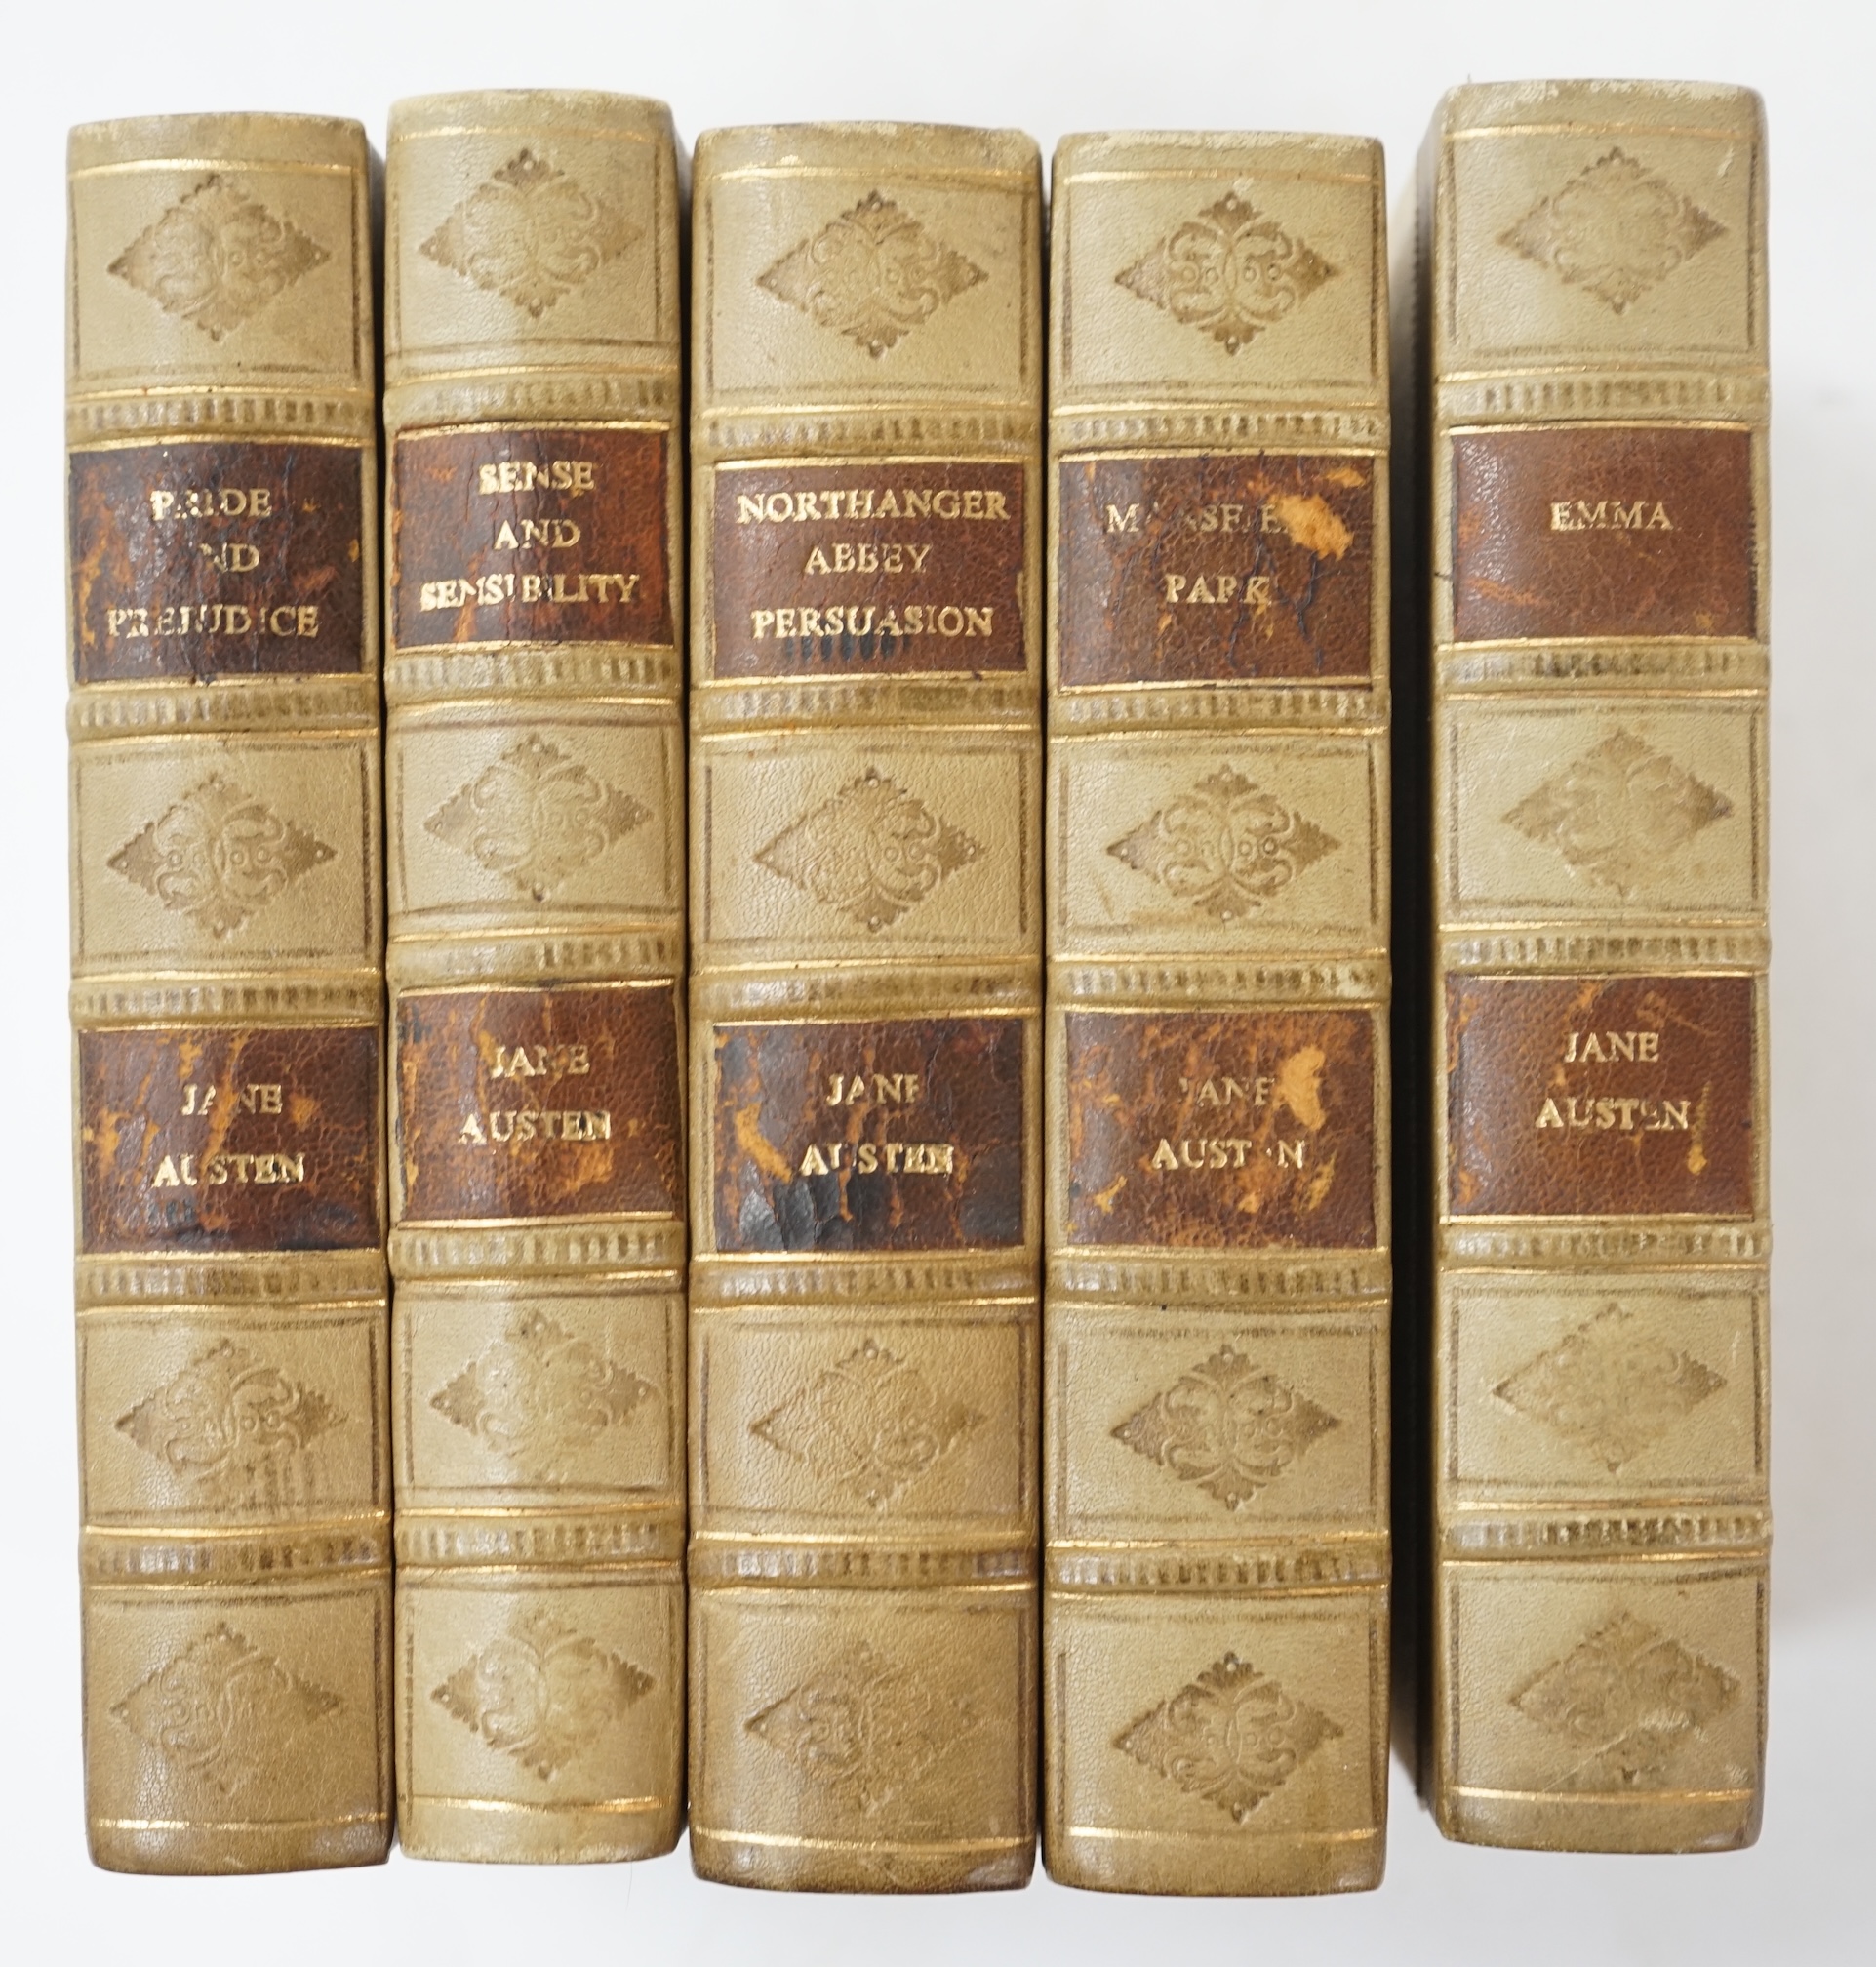 Austen, Jen - Bentley's Standard Novels, 5 vols. 1st Editions (their first English re-issue since 1818), comprising - Sense and Sensibility, Emma, Mansfield Park, Northanger Abbey / Persuasion, Pride & Prejudice. each wi